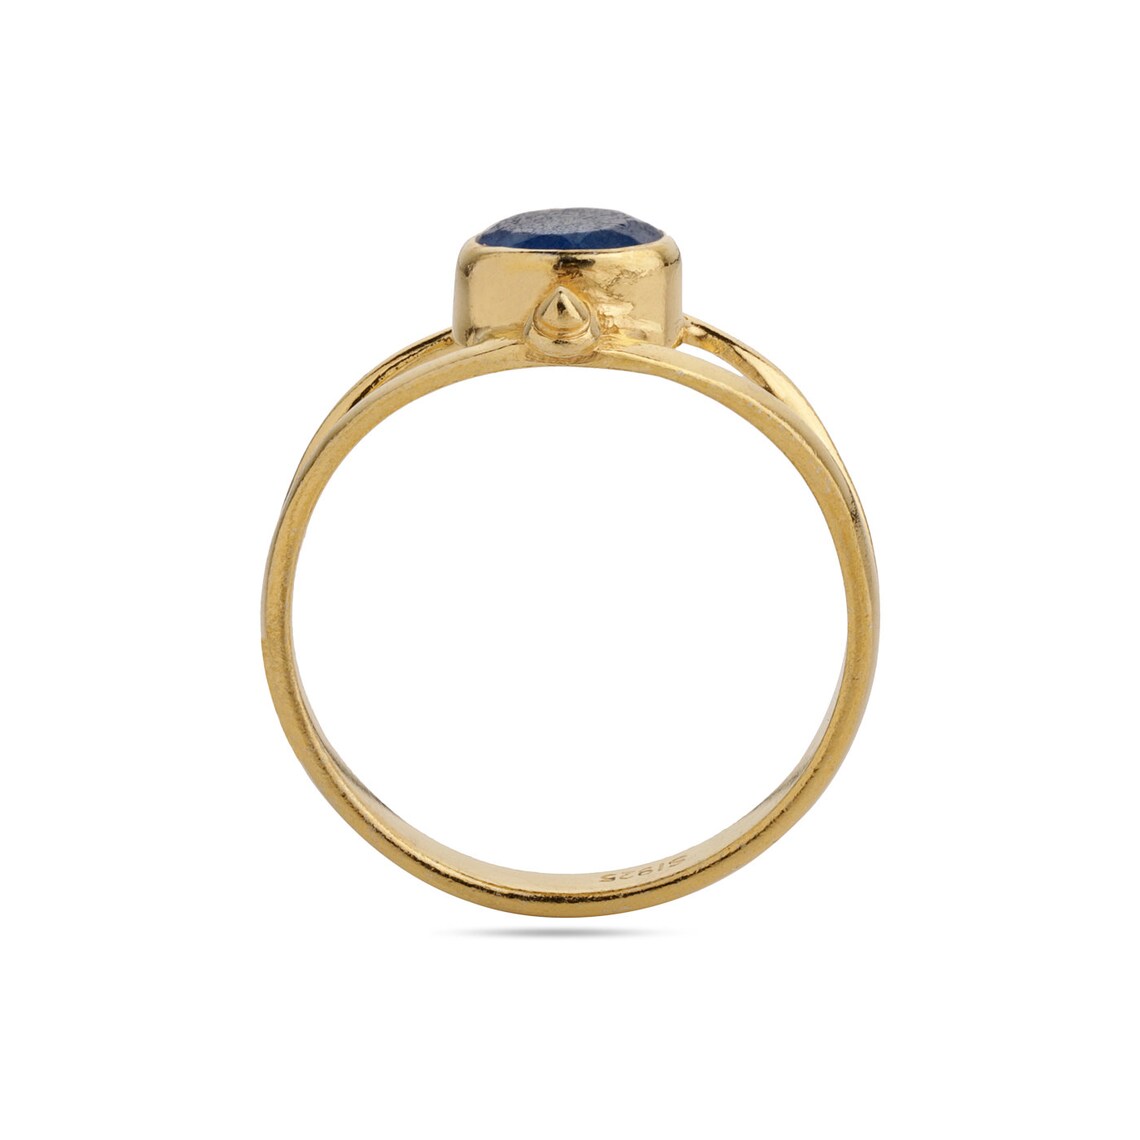 925 Sterling Silver Ring with Blue Gemstone and Gold Plating